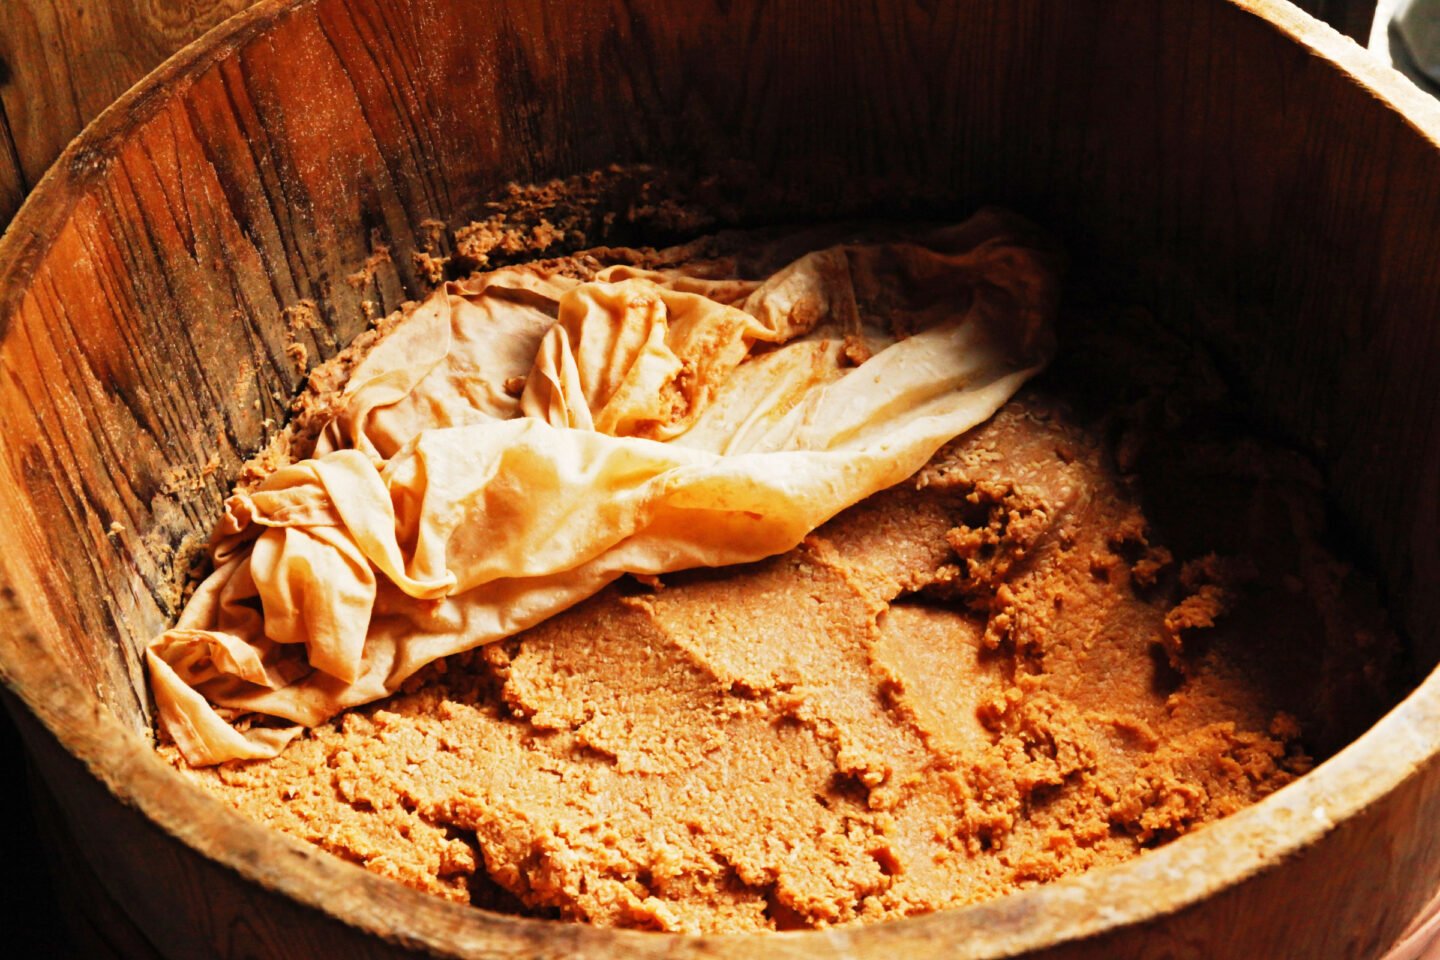 miso paste stored in a barrel